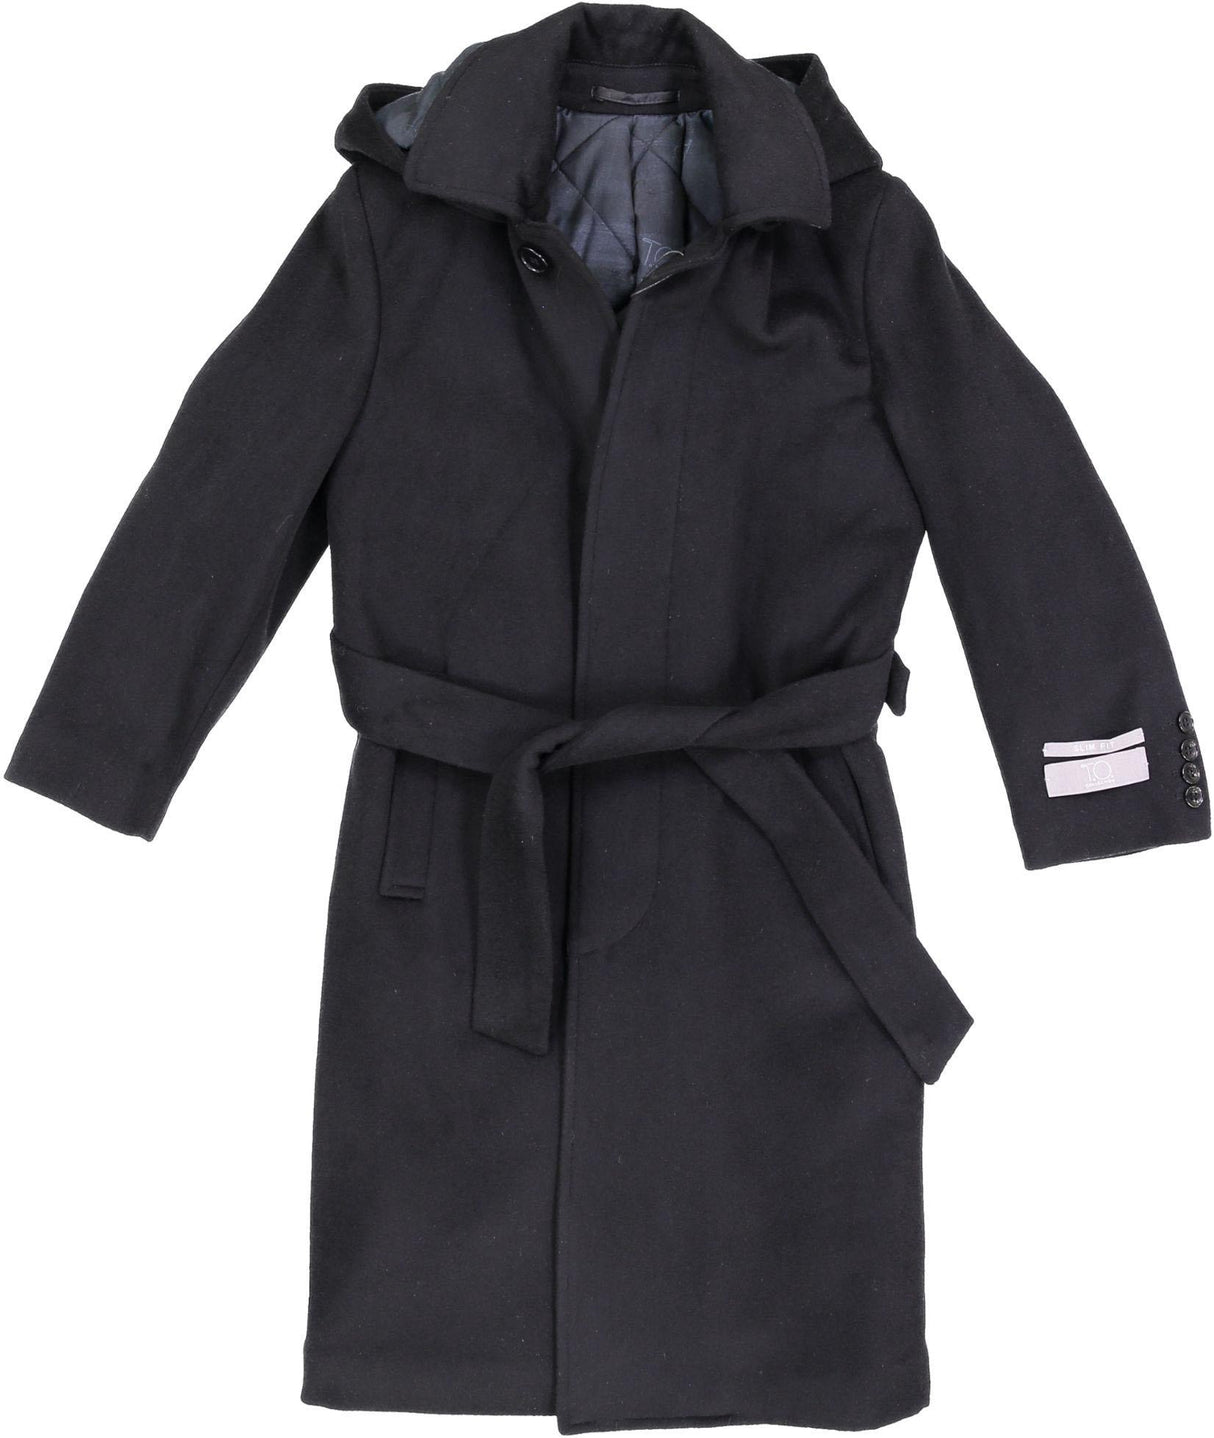 T.O. Collection Boys Full Length Wool Coat - CHARLOTTE-1